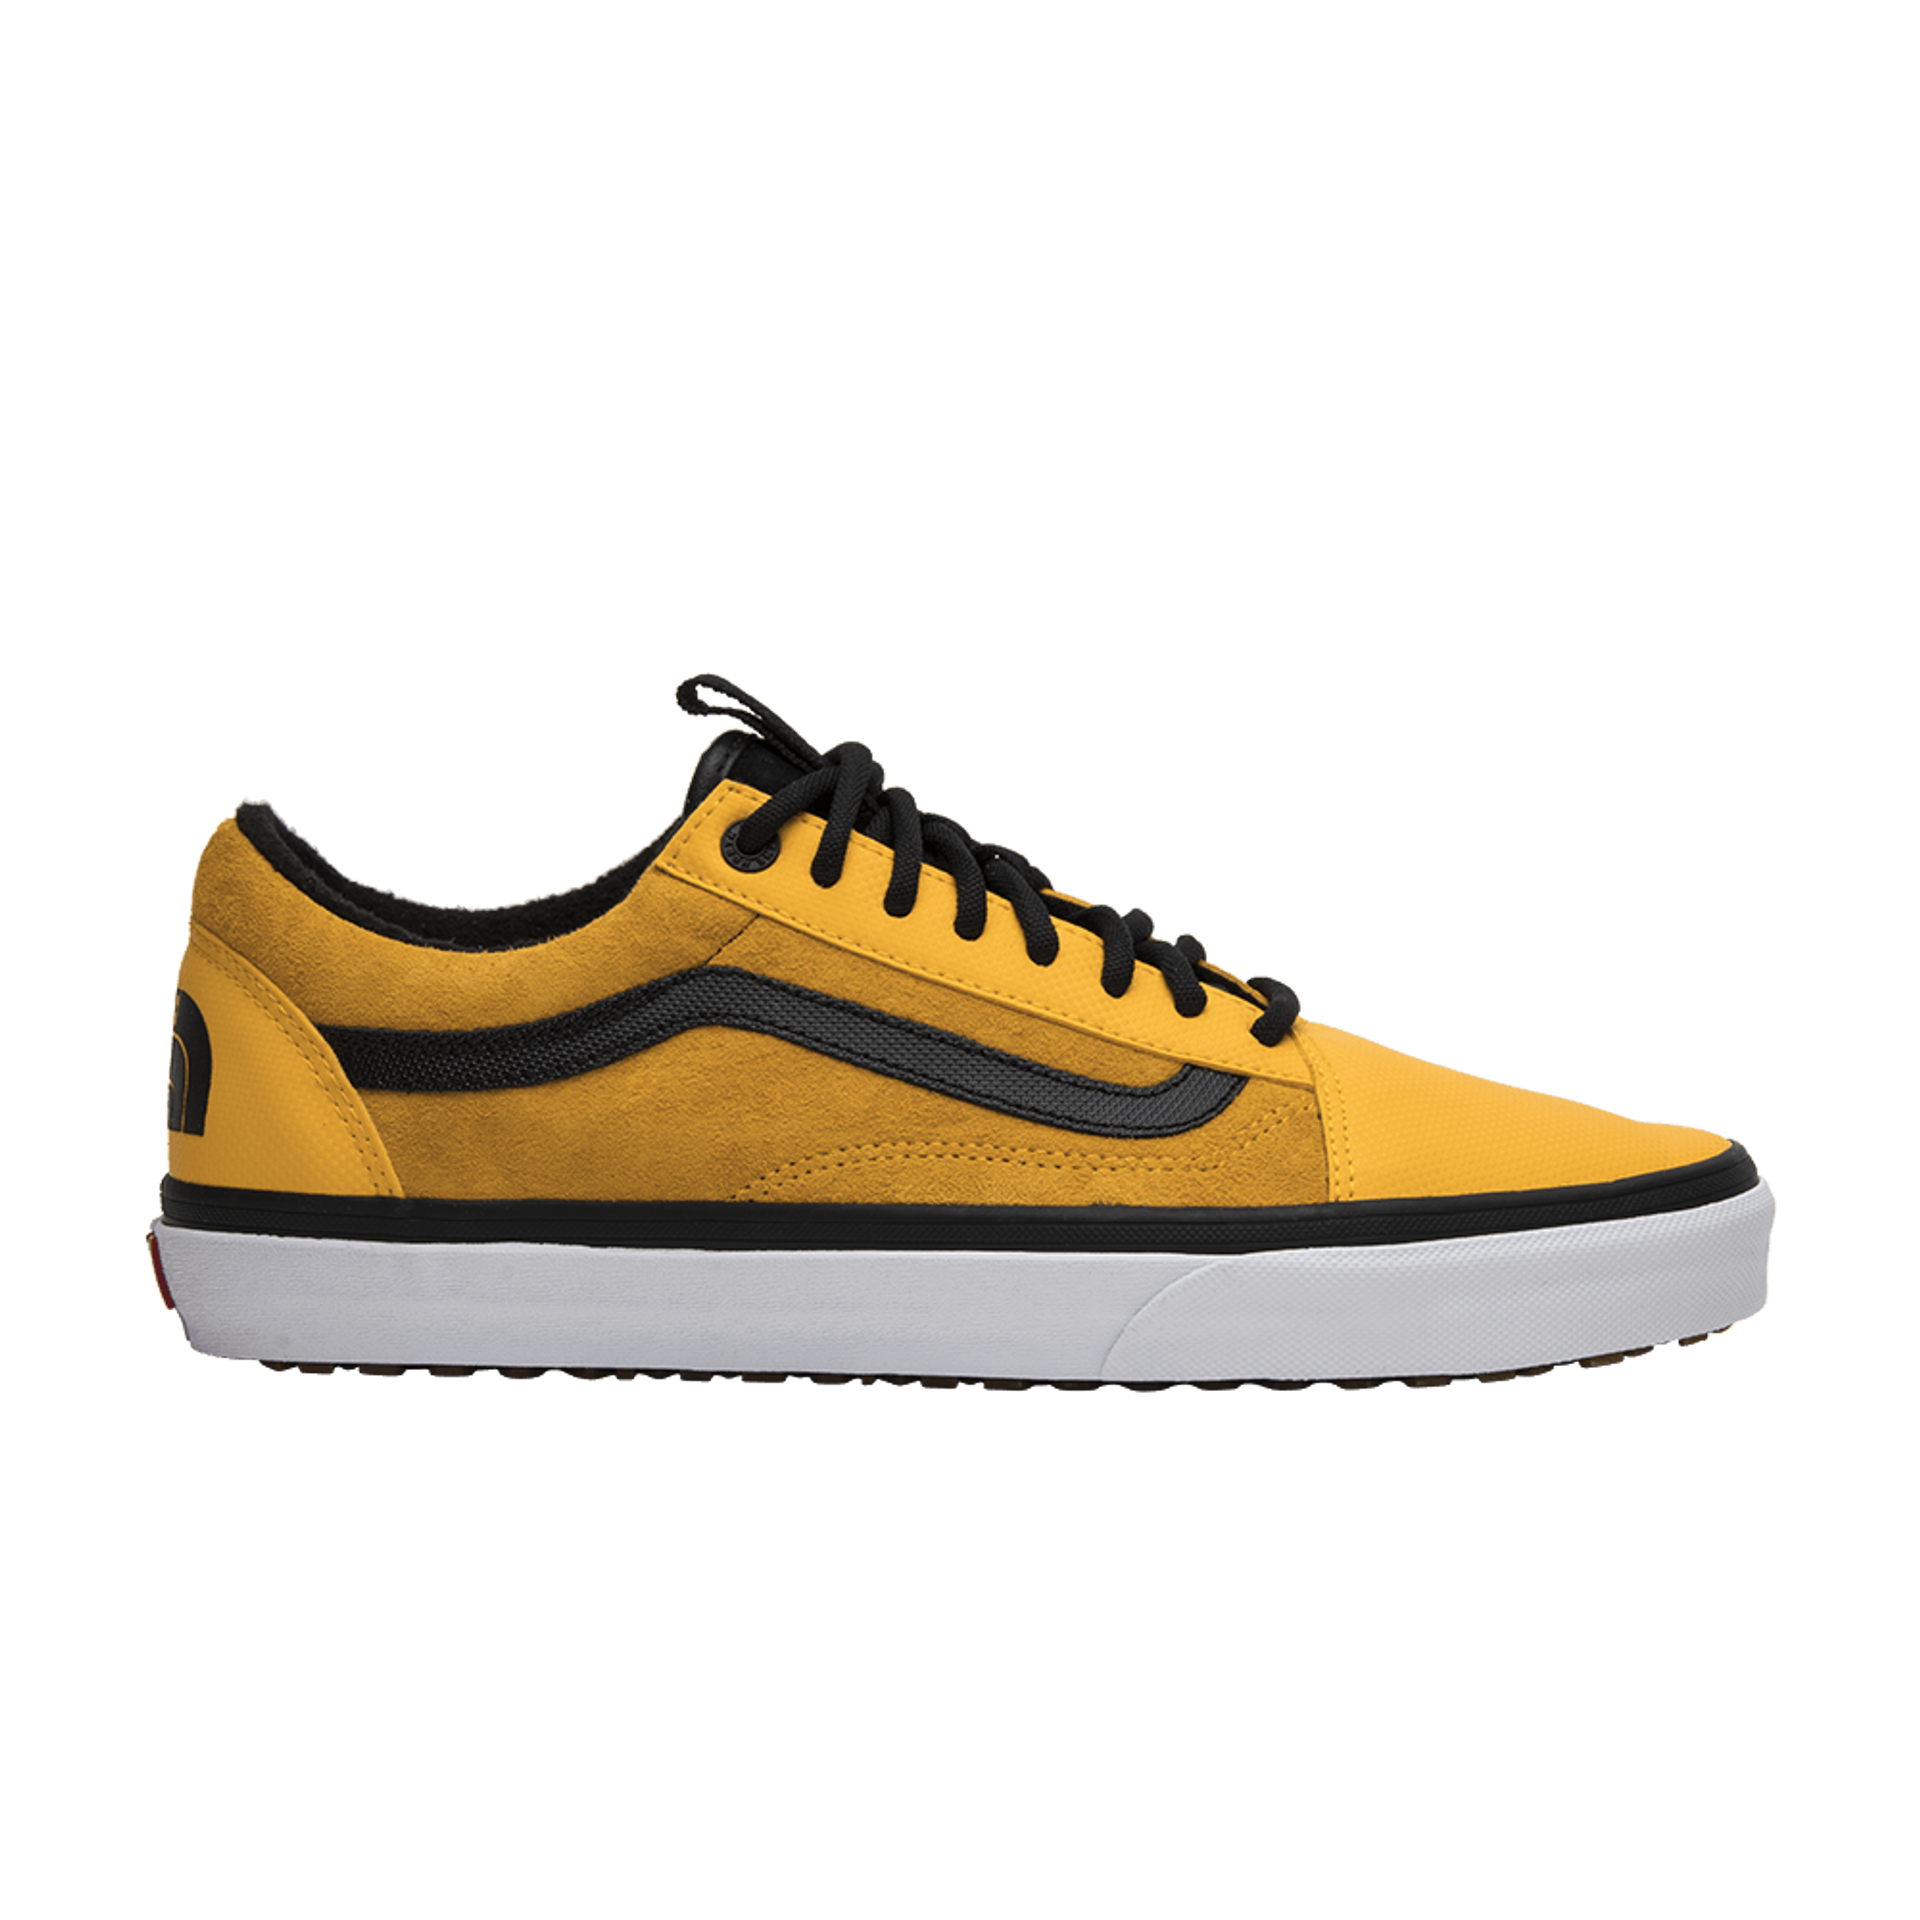 Vans The North Face x Old Skool MTE DX 'Yellow'